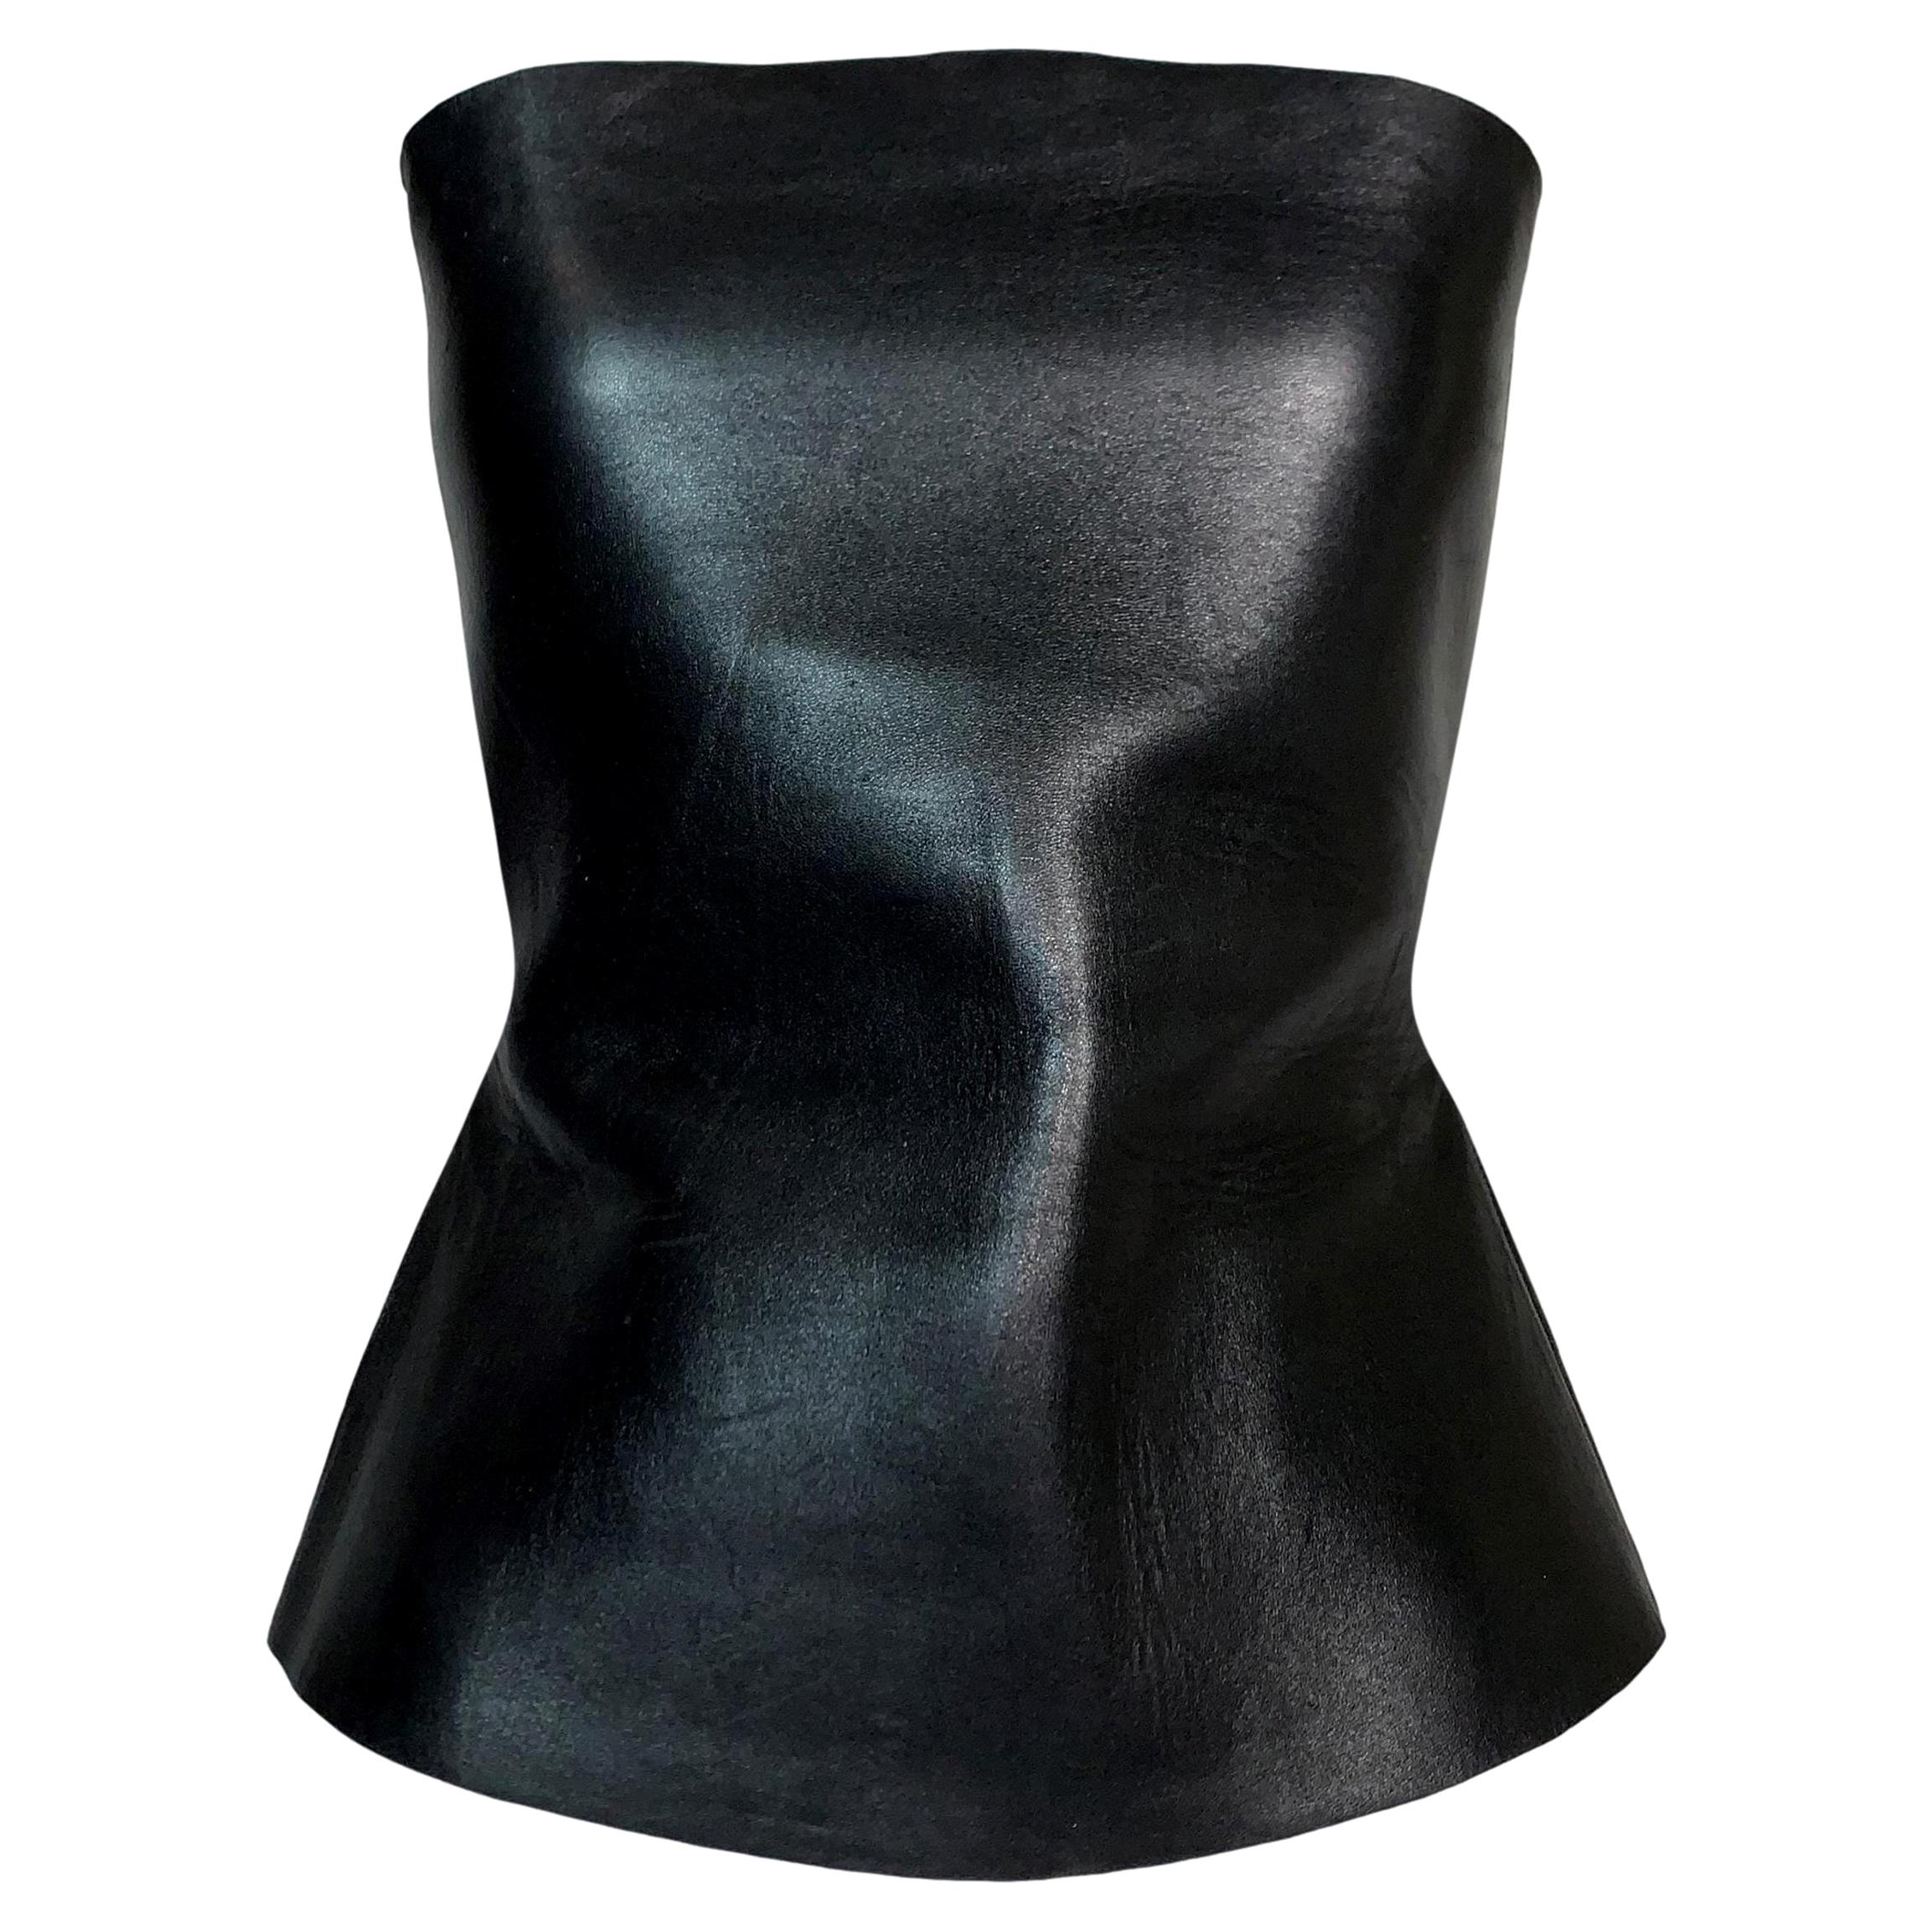 S/S 2001 Yves Saint Laurent Tom Ford Black Leather Strapless Bustier Top